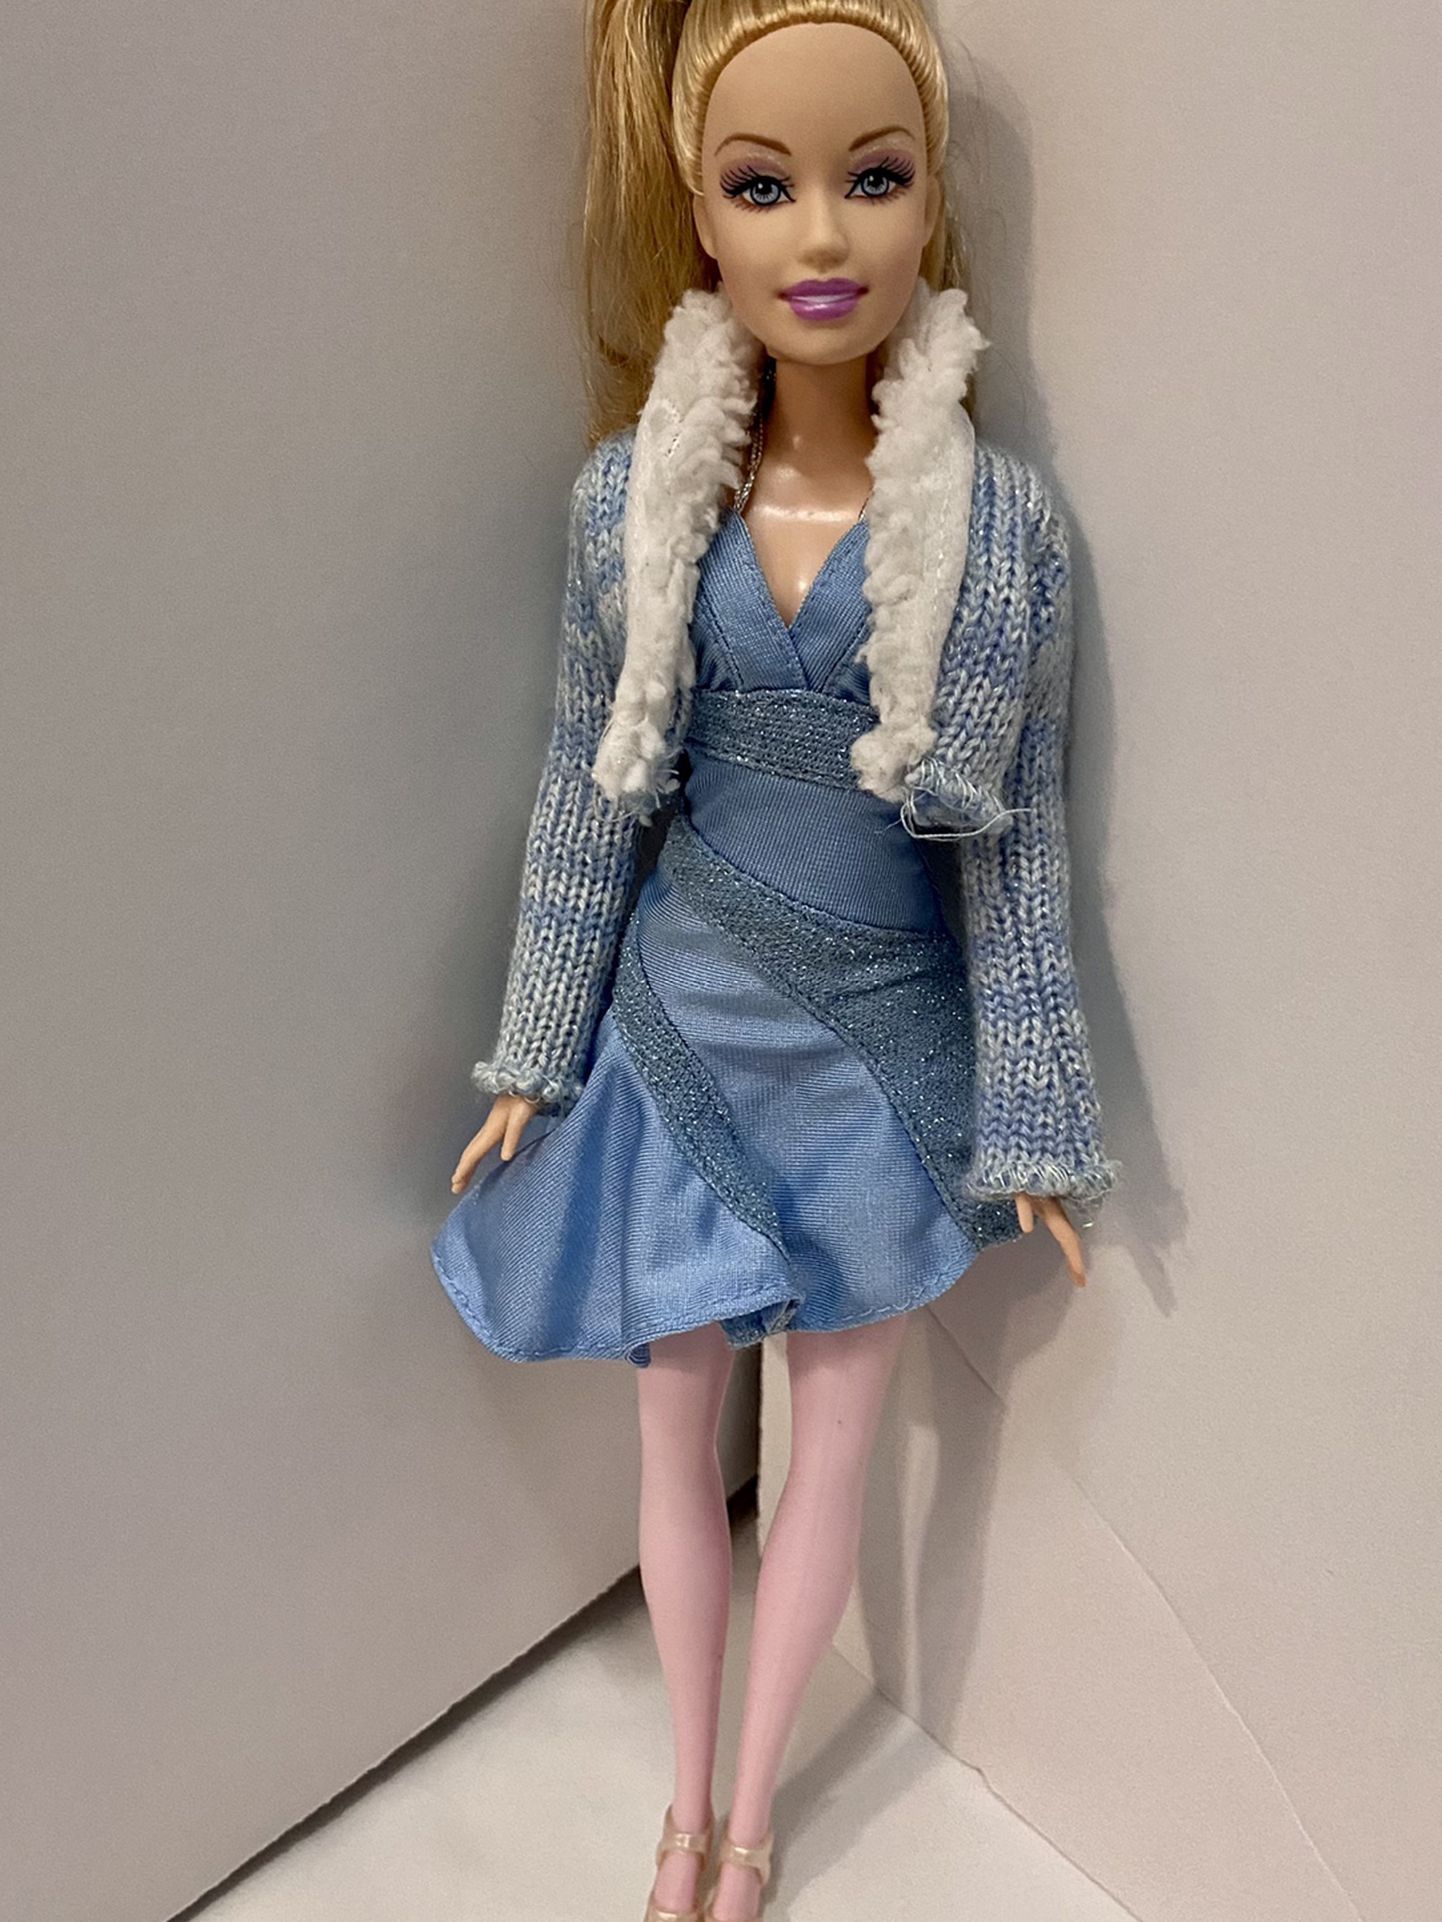 Barbie Doll In Winter Outfit